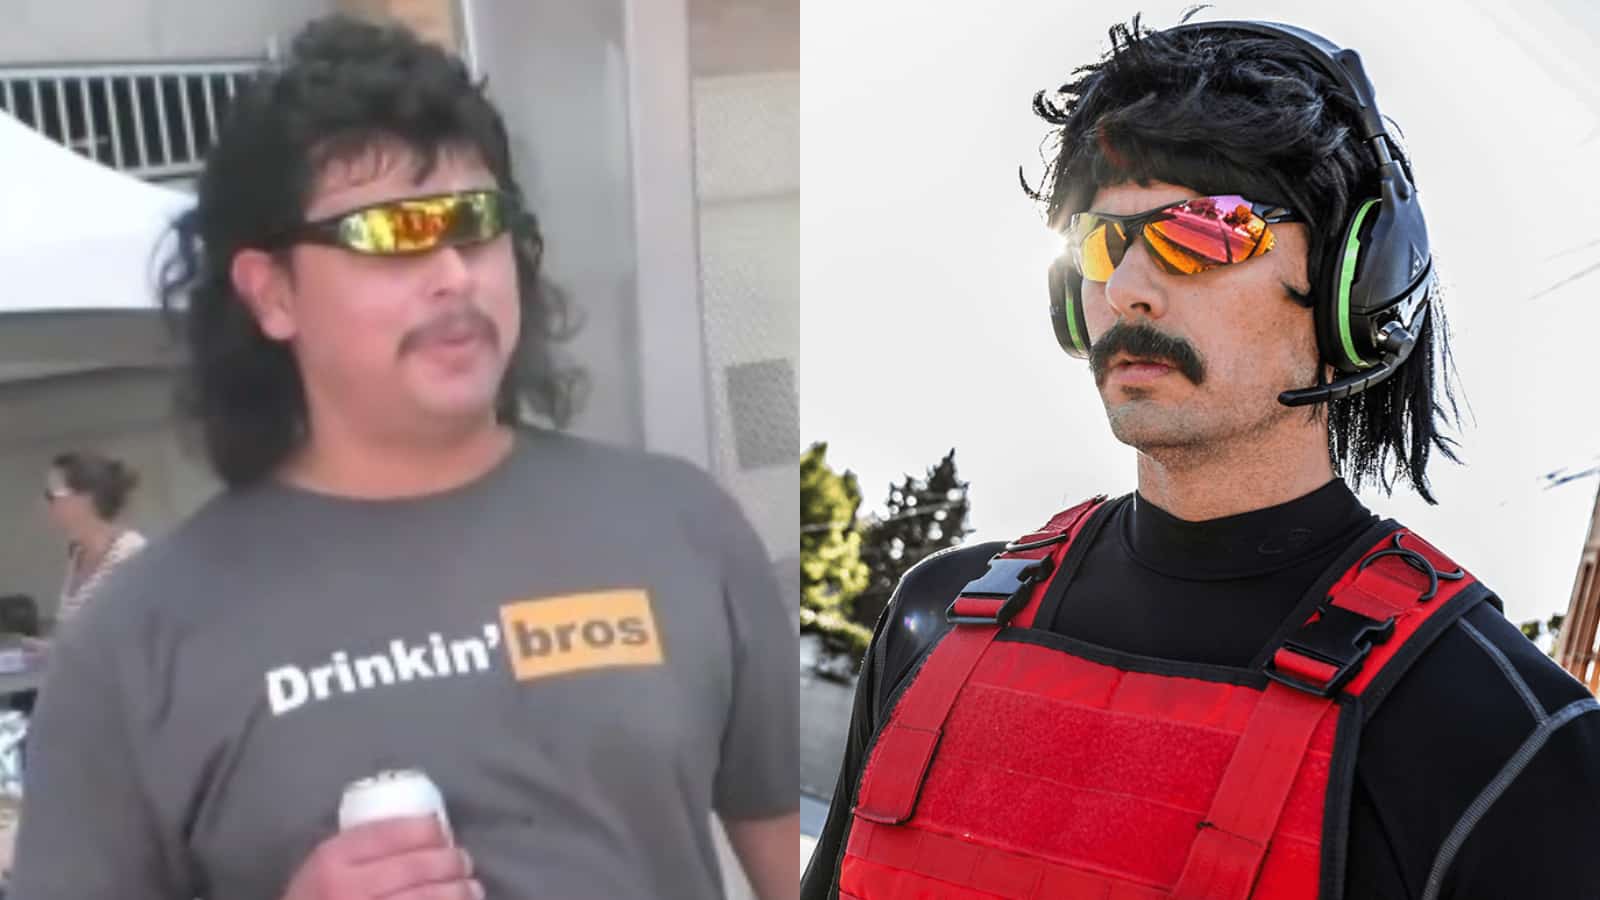 Dr Disrespect and lookalike